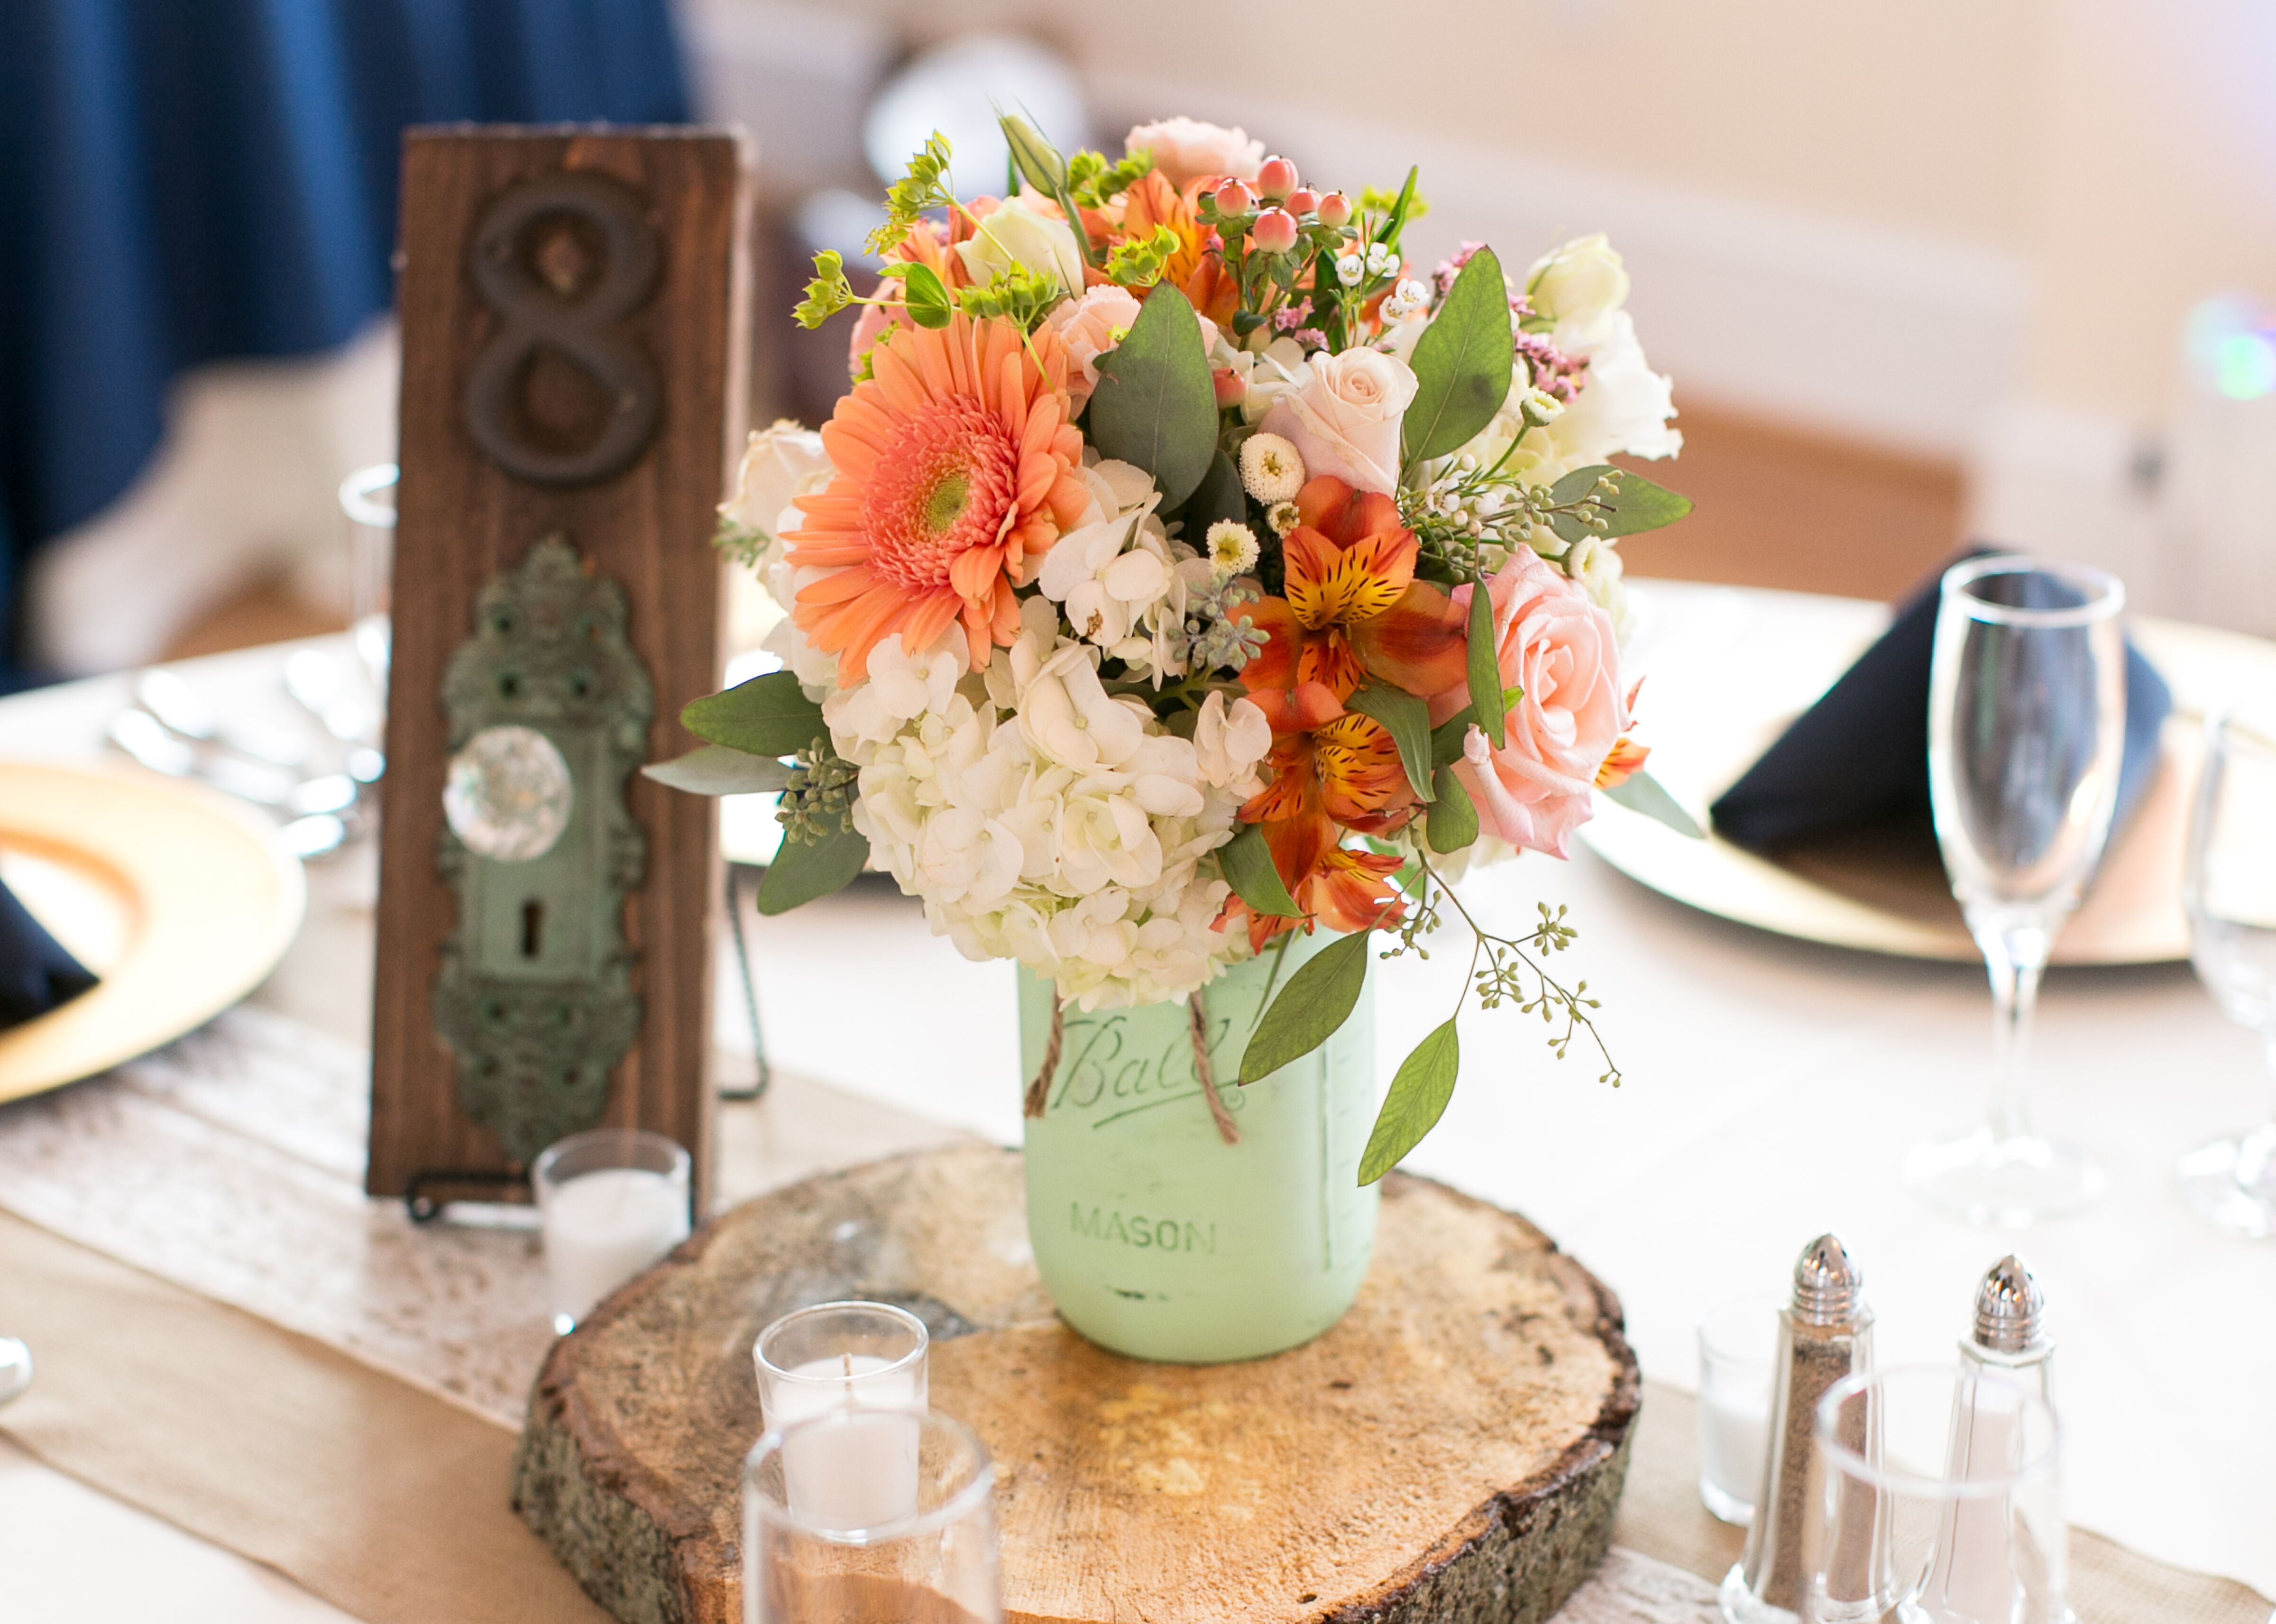 Wood Slab Centerpieces With Mint Mason Jars And Doorknob Table Numbers